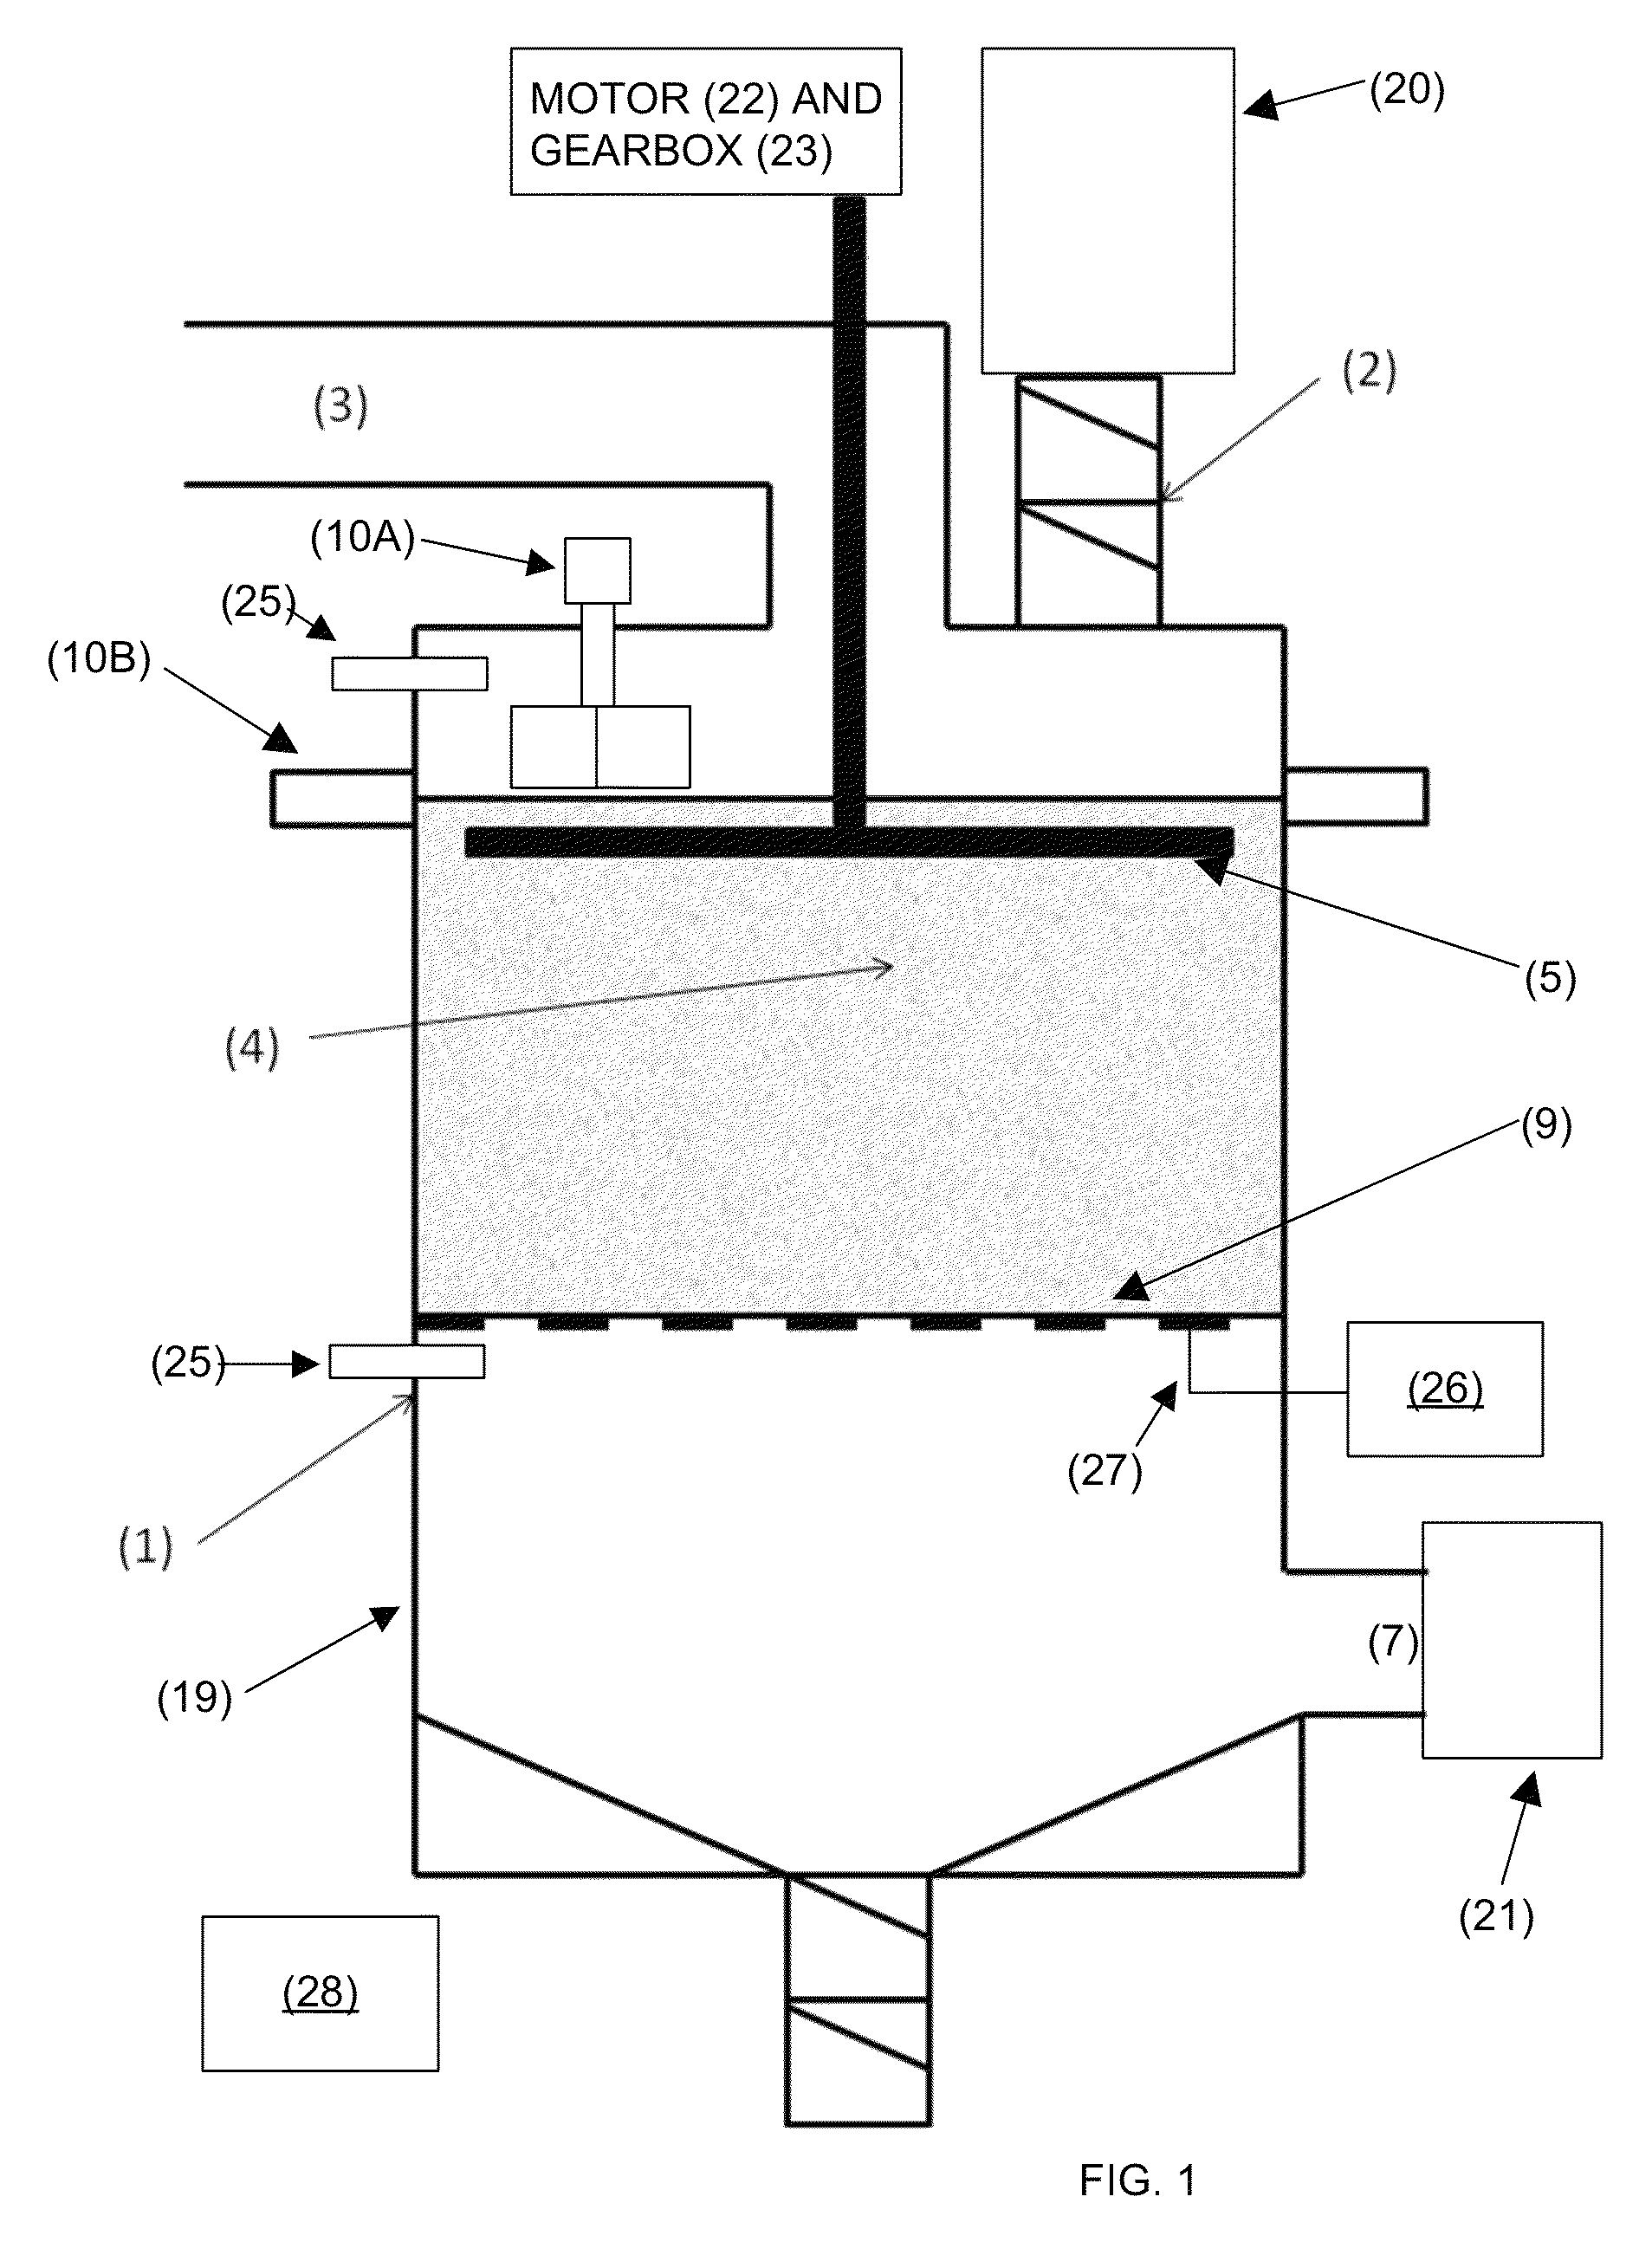 Downdraft gasifier with improved stability